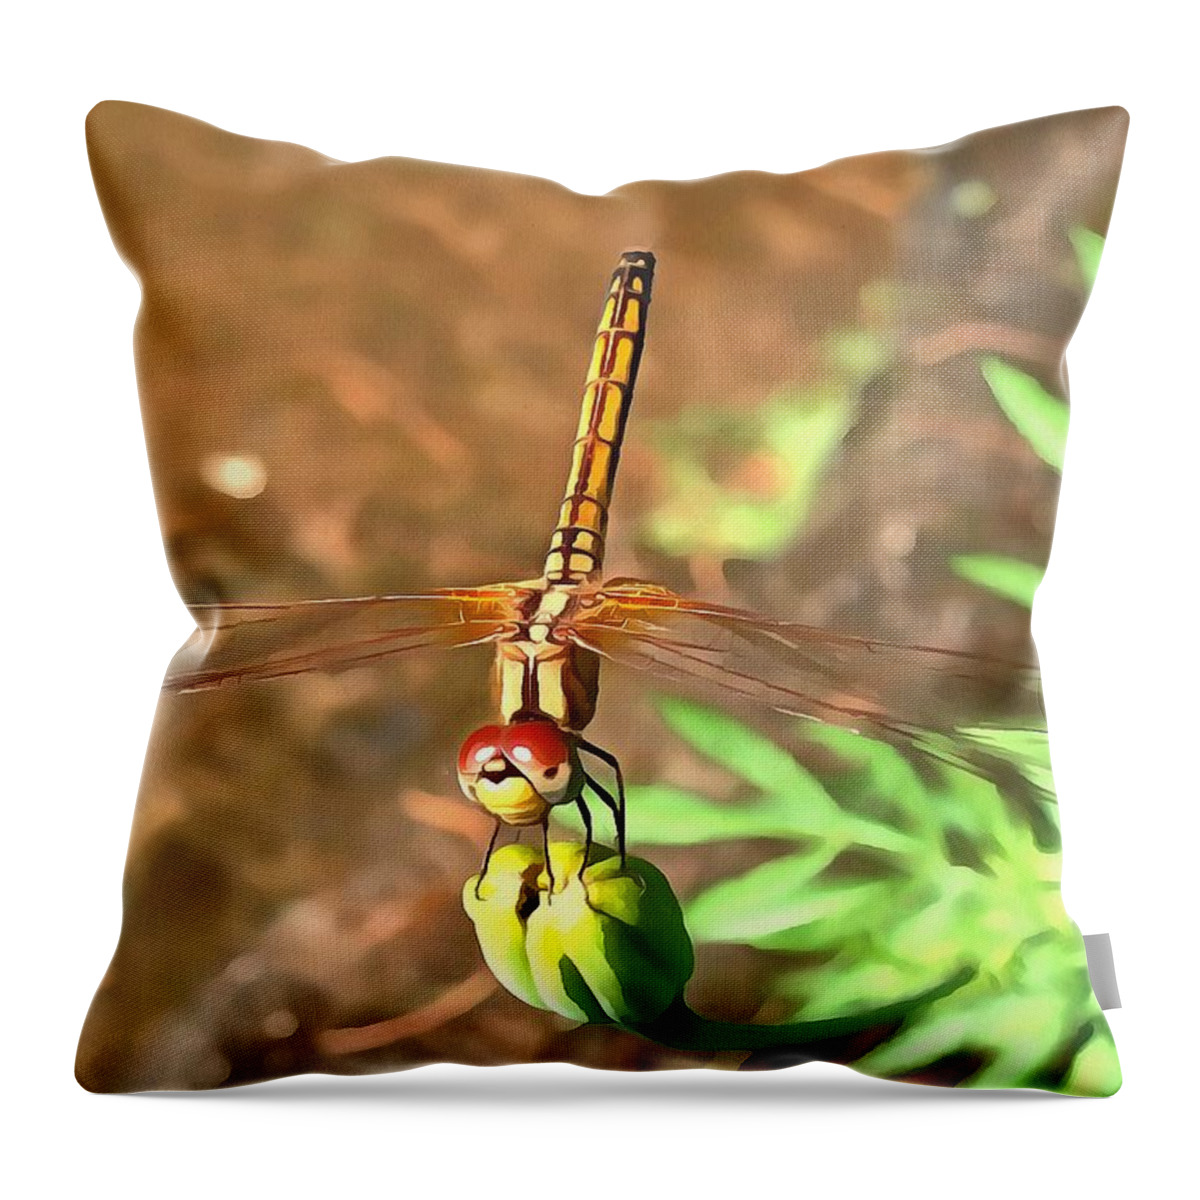 Green Throw Pillow featuring the painting Dragonfly by Taiche Acrylic Art